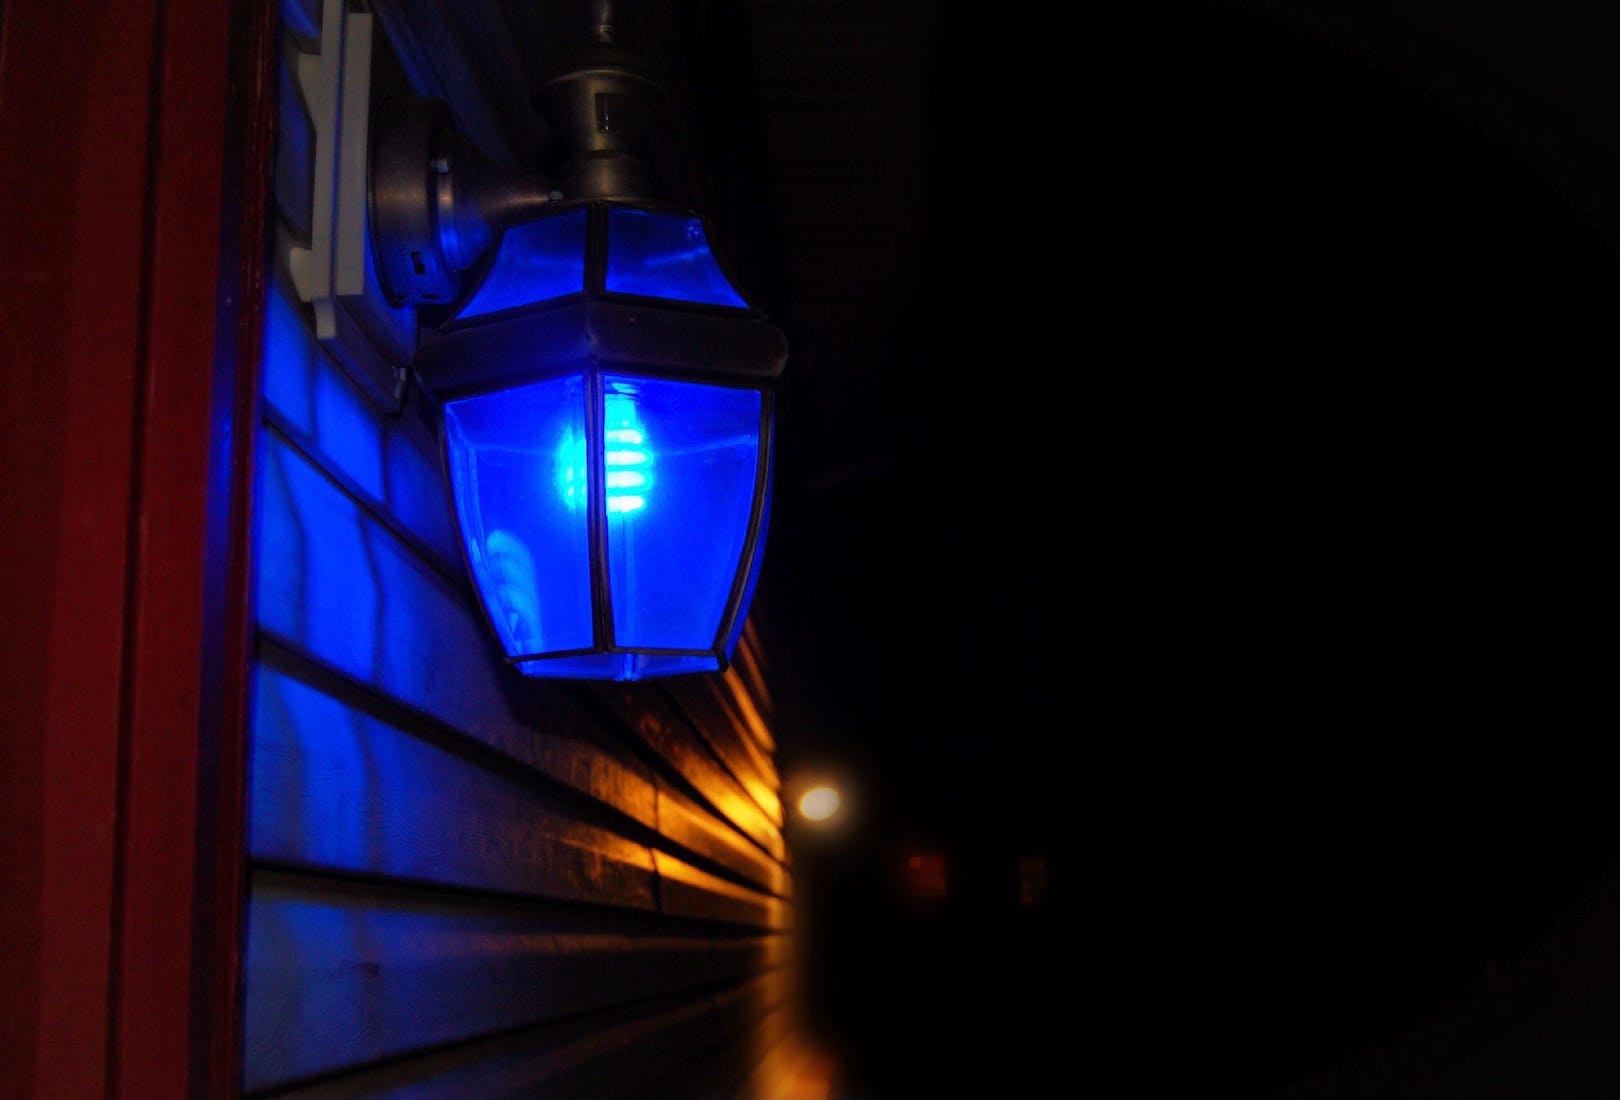 Project Blue Light to show support for law enforcement